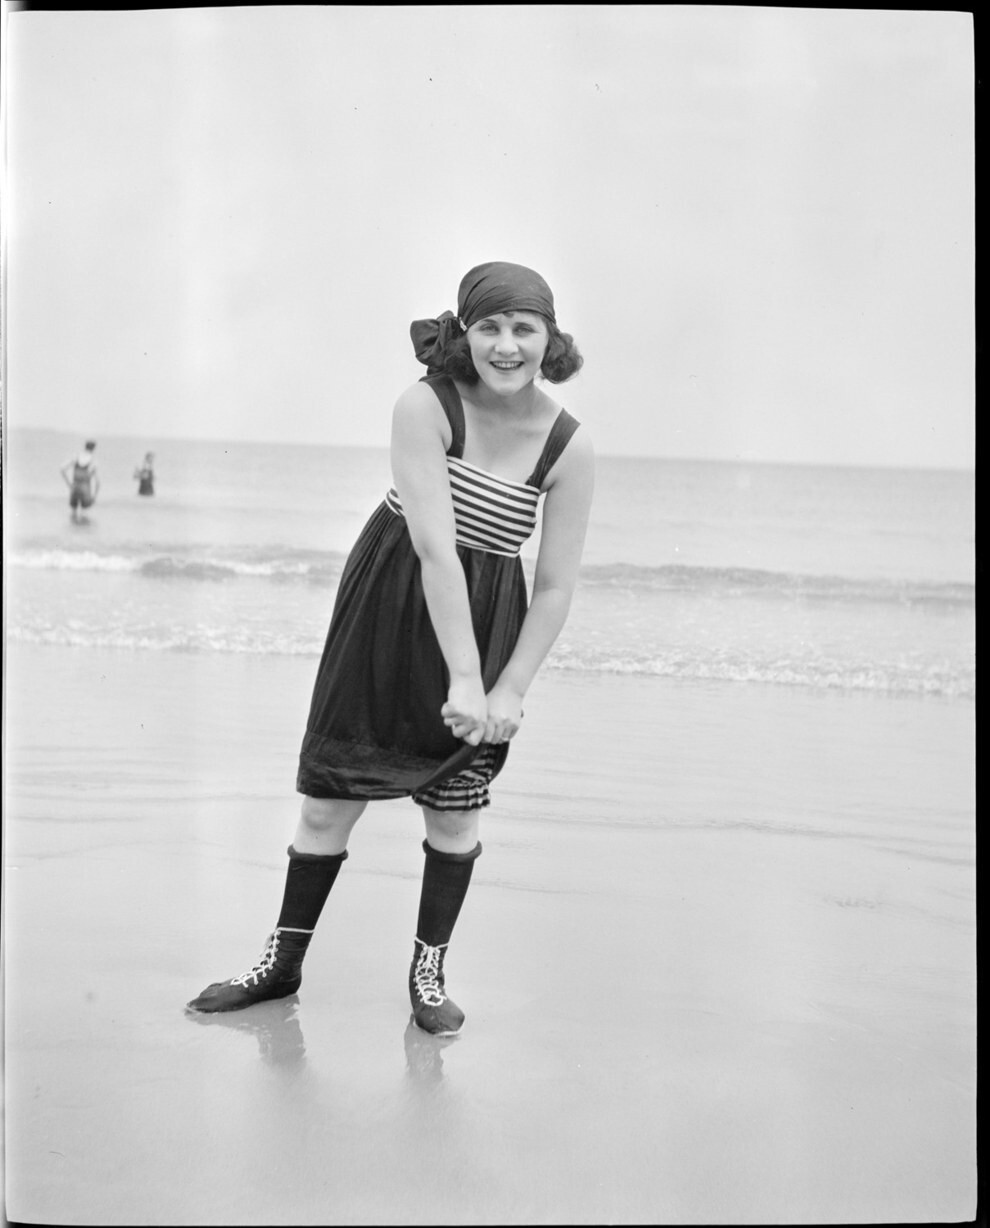 This Is What Women Wore To The Beach In The 1920s